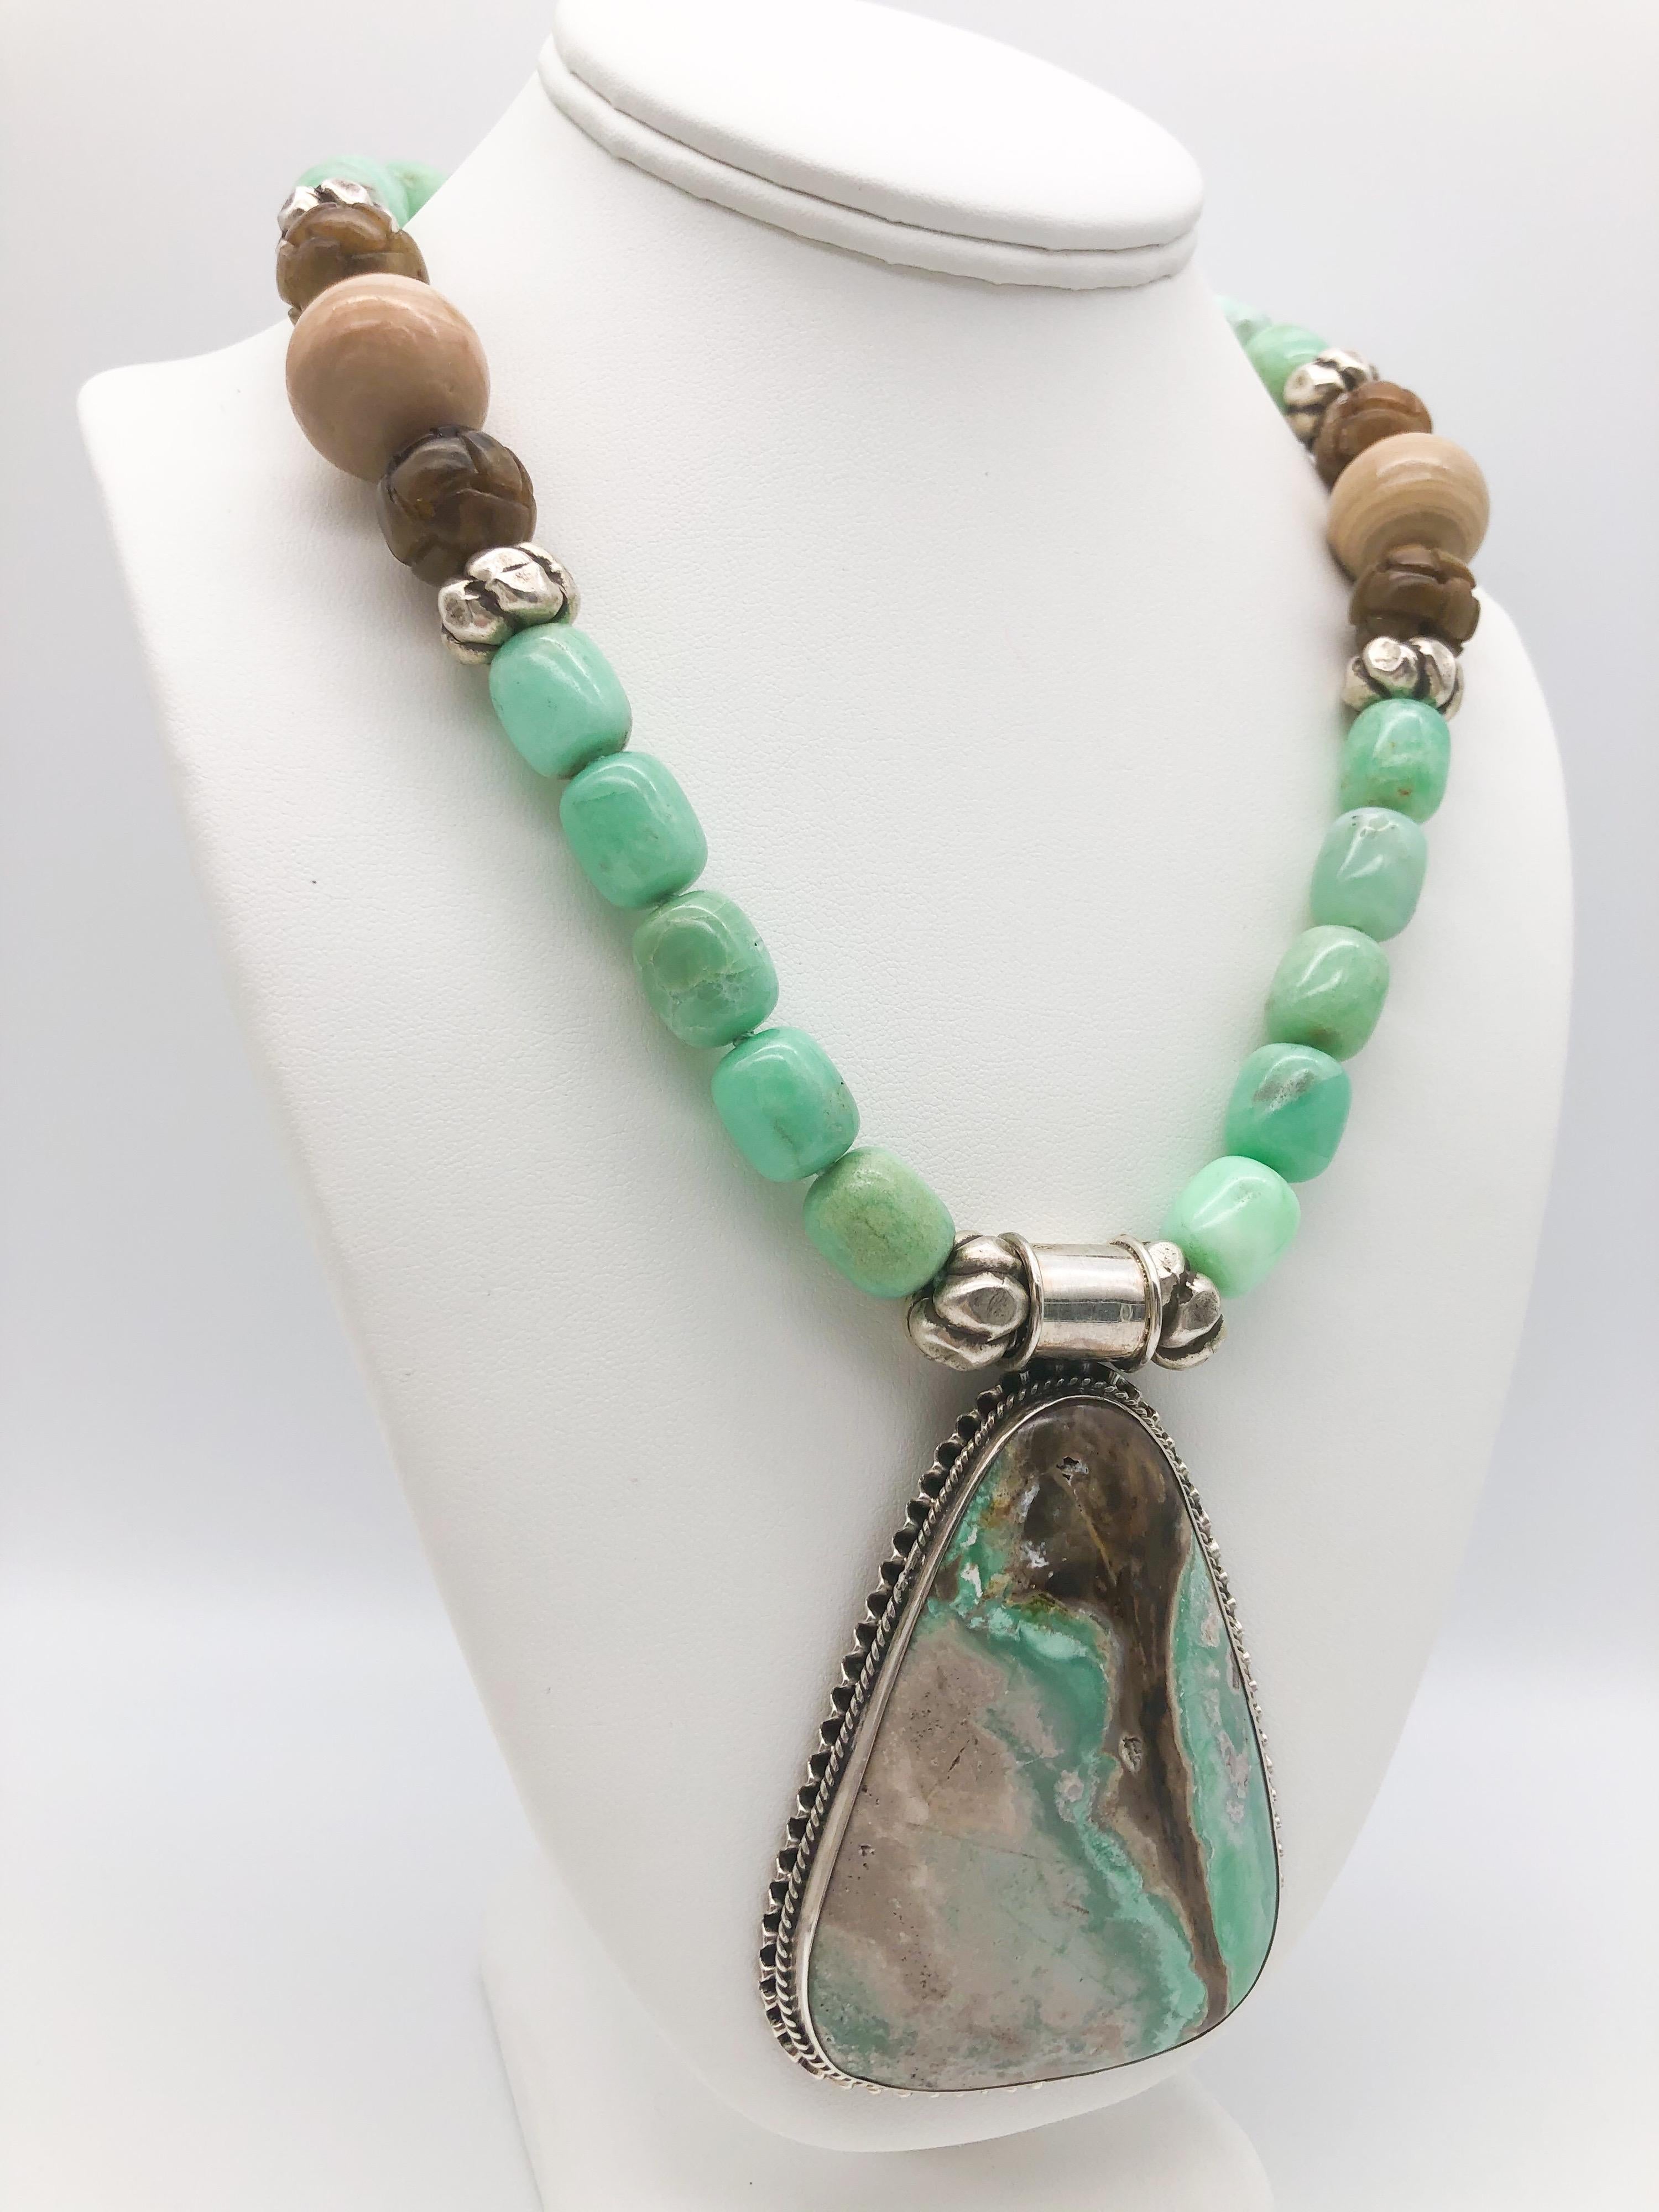 One-of-a-Kind

A polished Chrysoprase Specimen set in Sterling Silver makes a one-of-a-kind Pendant. 
The surrounding necklace picks up the colors of the stone. Soft green polished Chrysoprase, carved dark brown Tobacco Jade, creamy 24mm Jasper